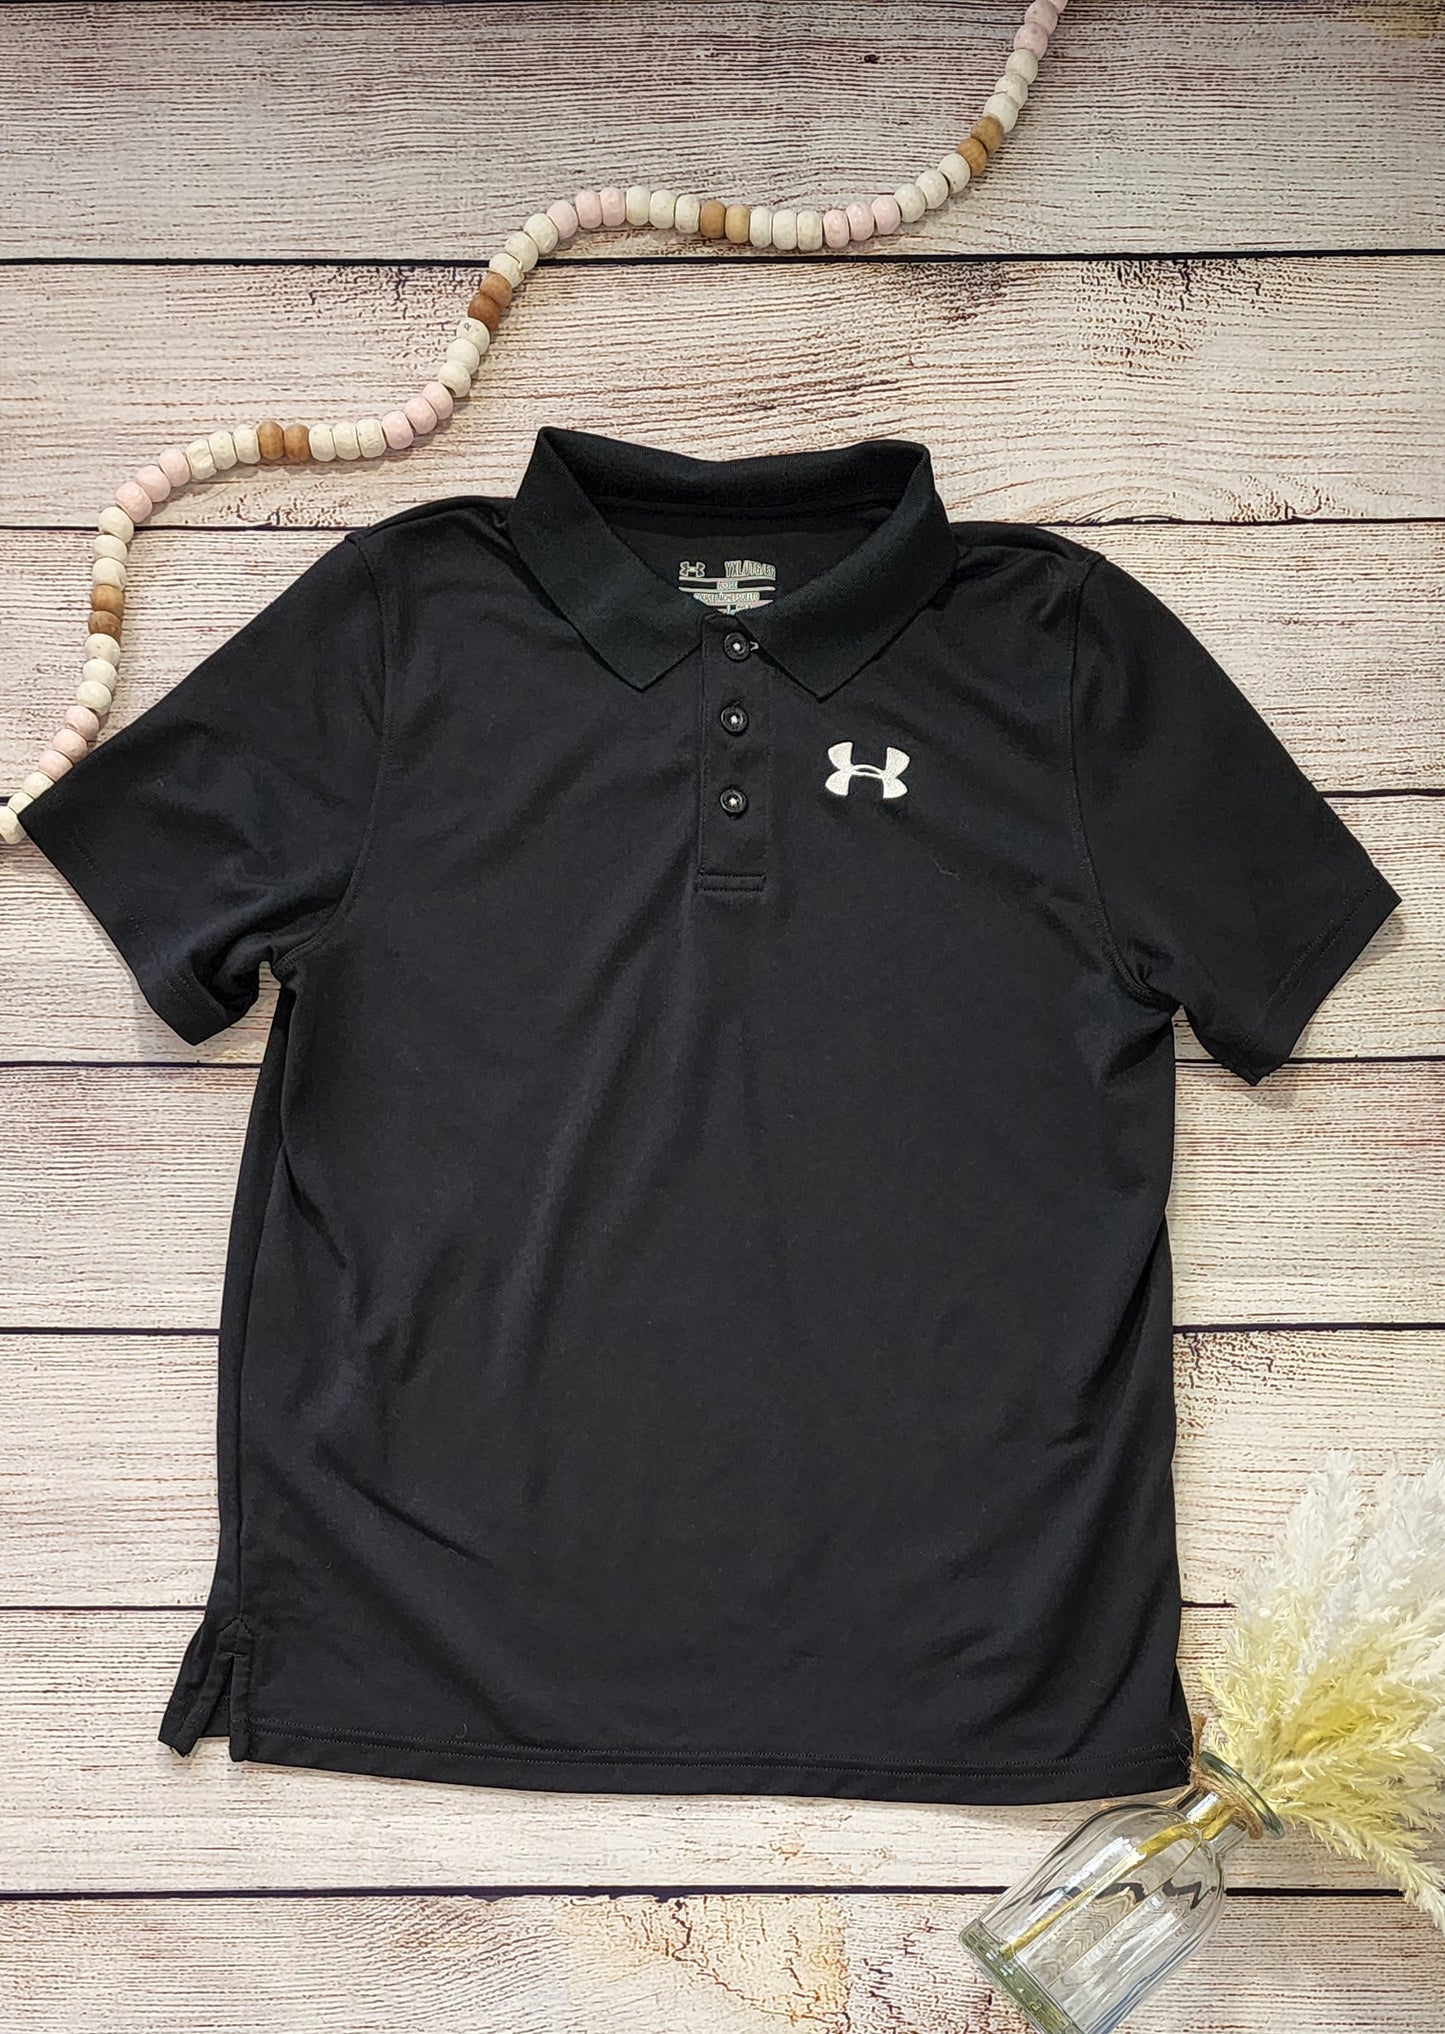 Under Armour Polo Tee, Youth X-Large